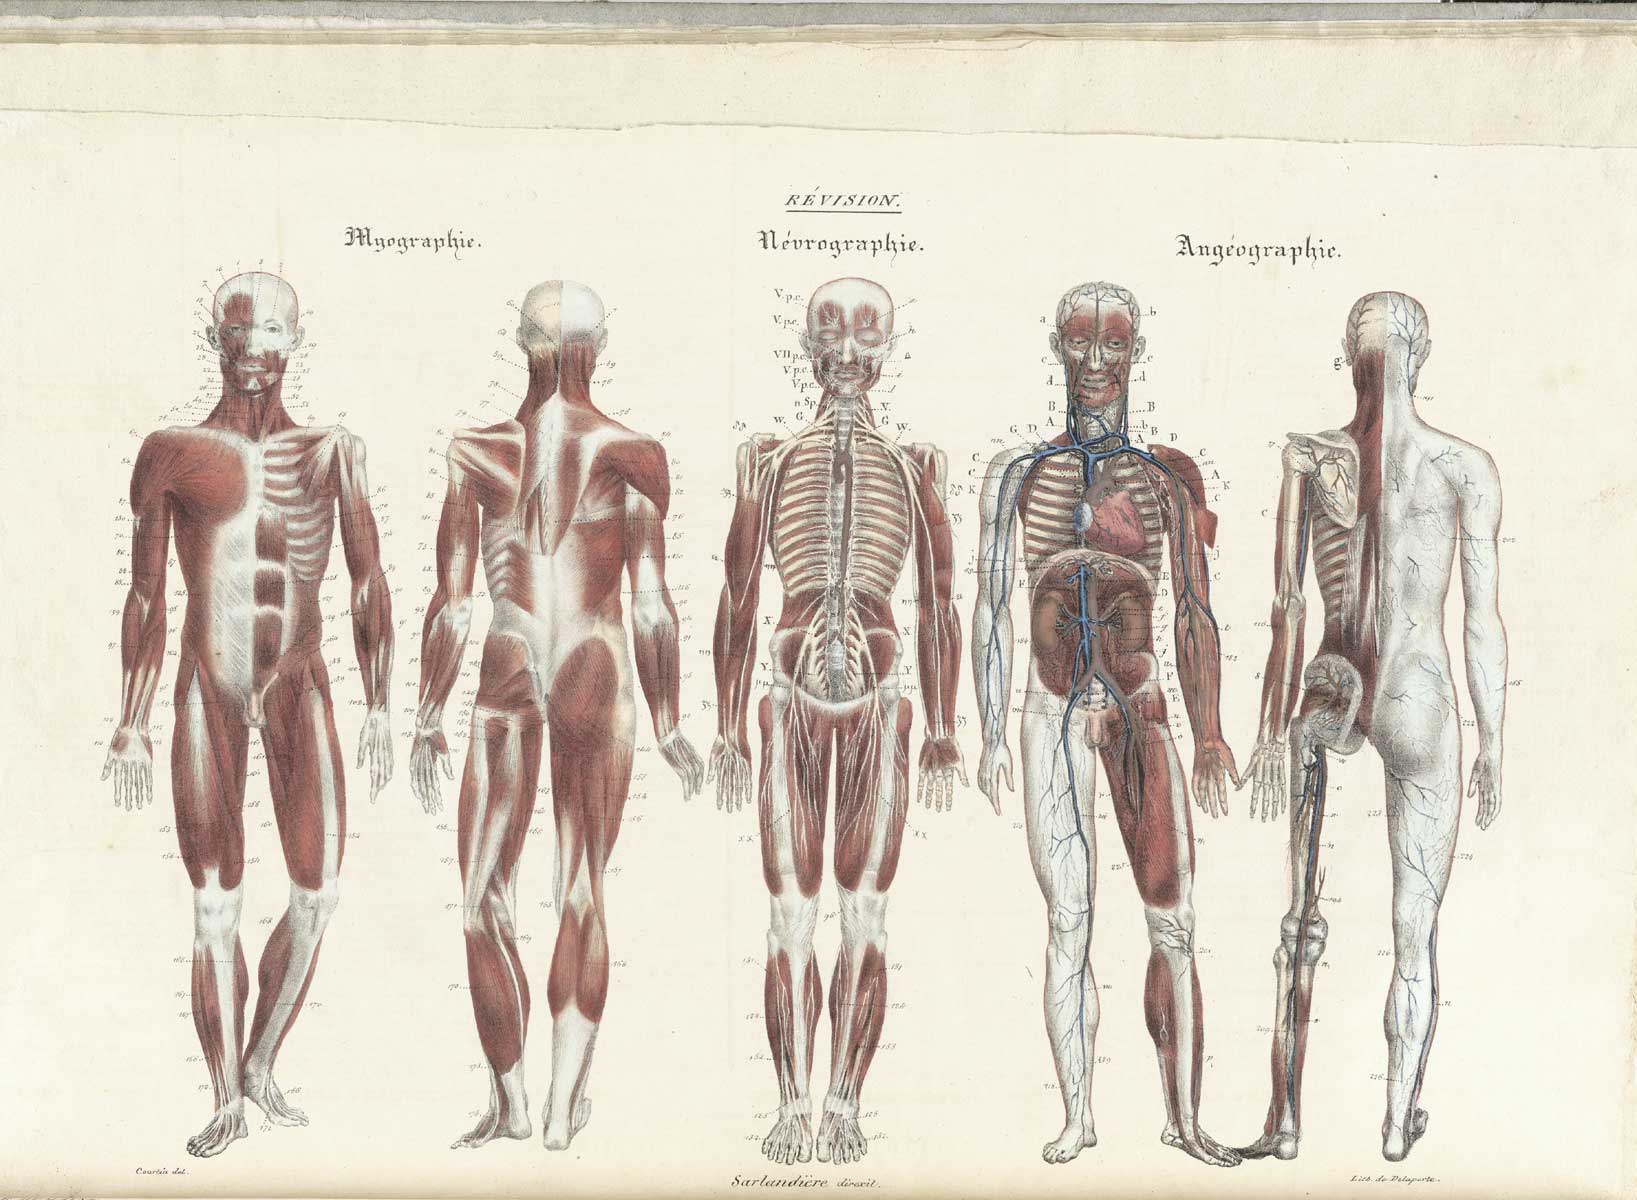 Front and back views of myopgrahie, neurographie and angeographie or the muscles, nerves and blood vessels of the body.